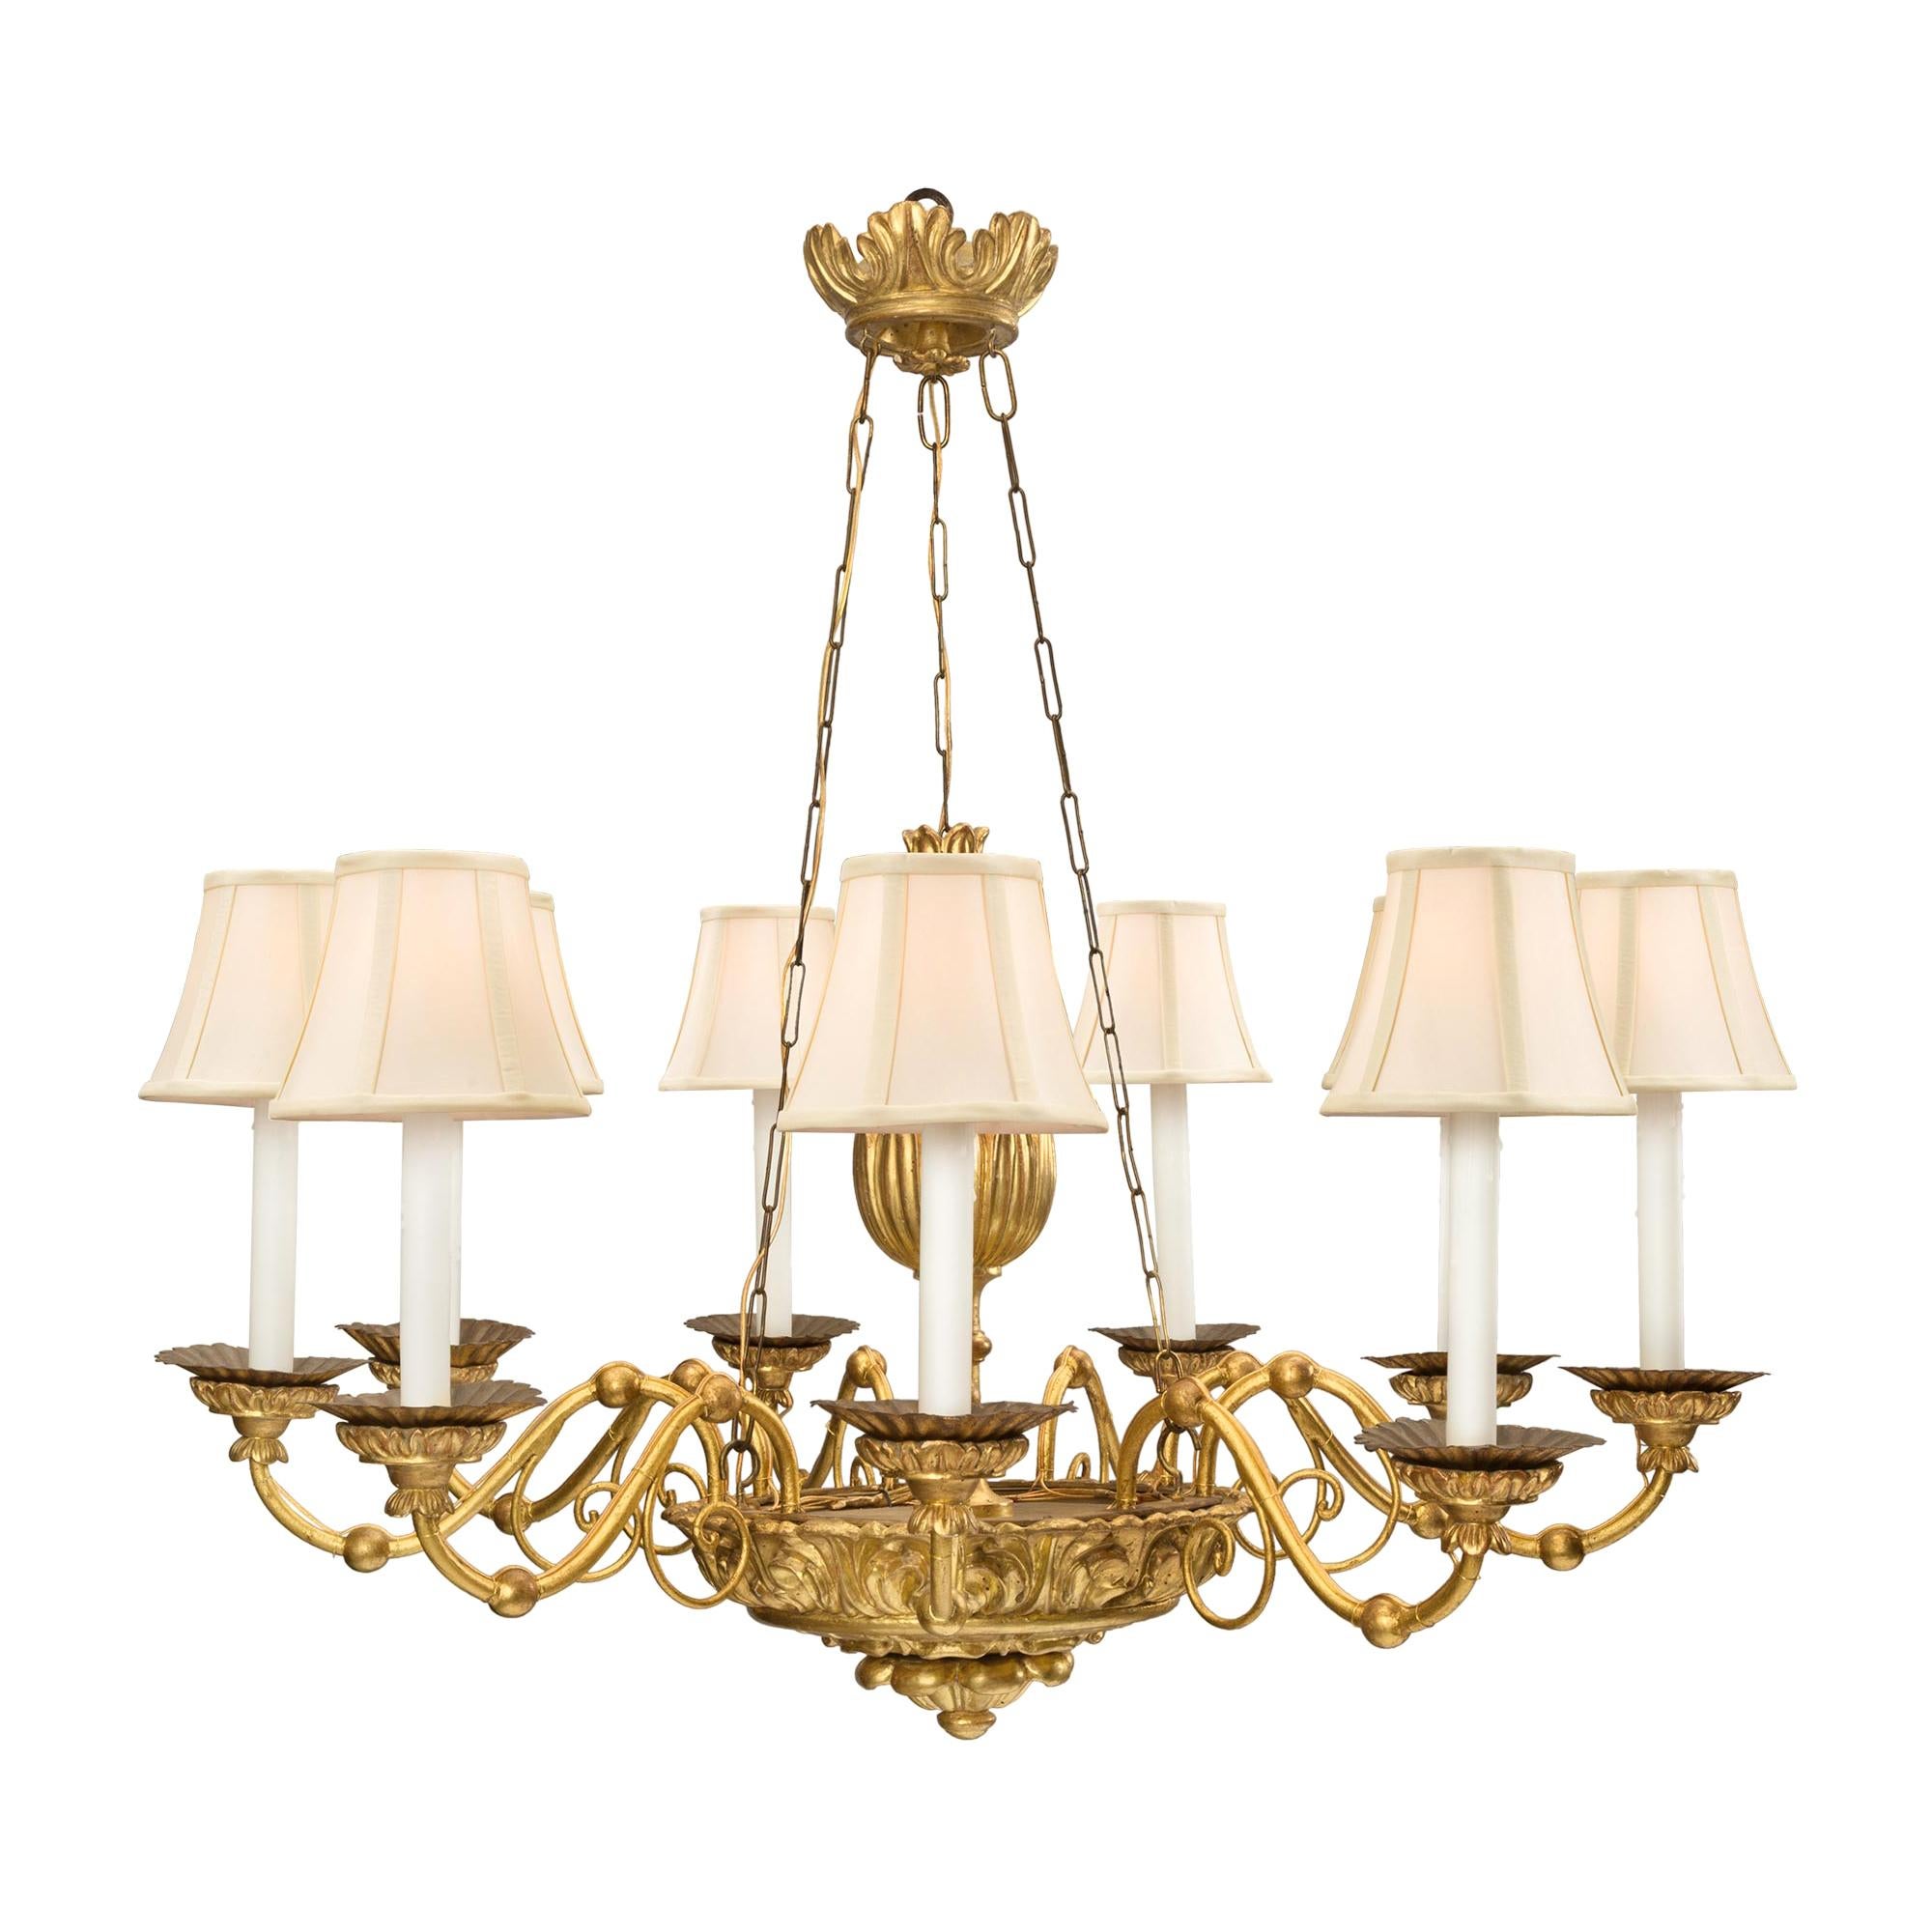 Italian 18th Century Giltwood and Iron Nine-Arm Chandelier from Luca